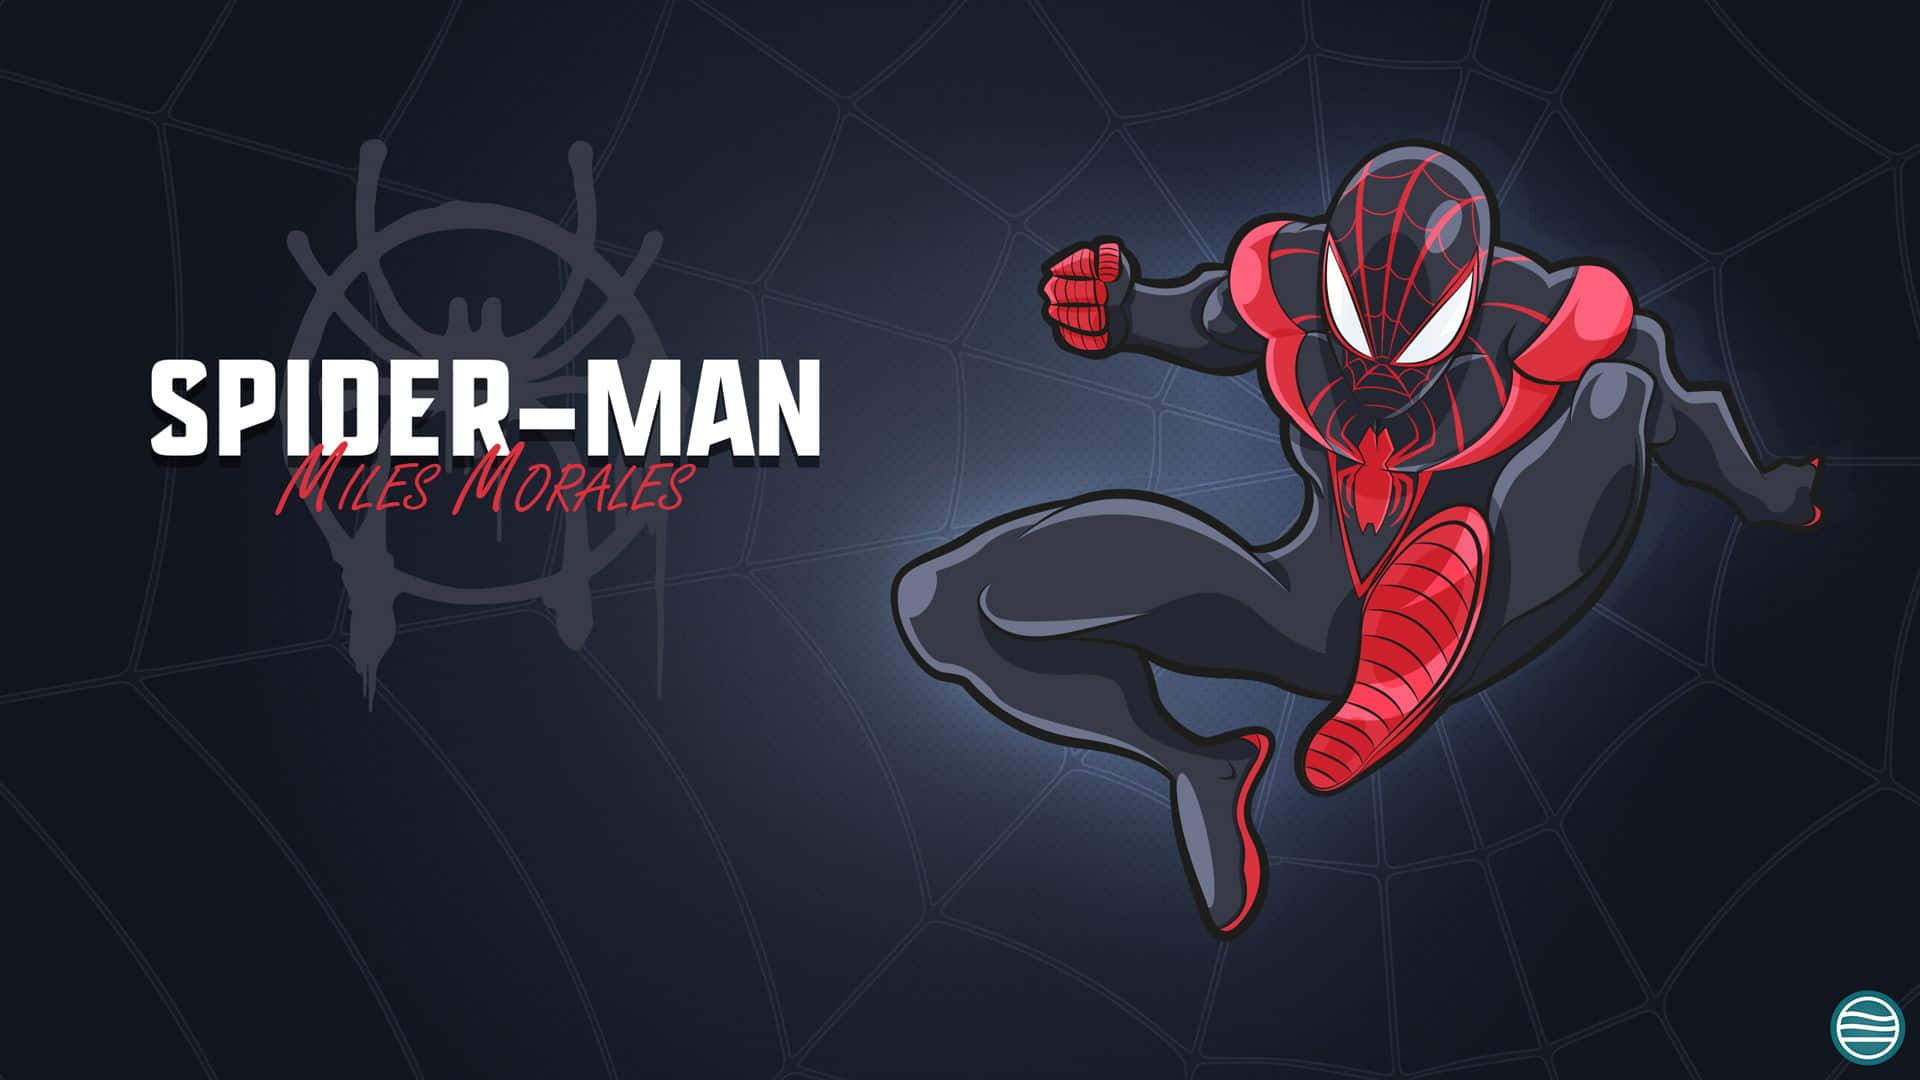 Miles Morales, the Spider-Man of Brooklyn